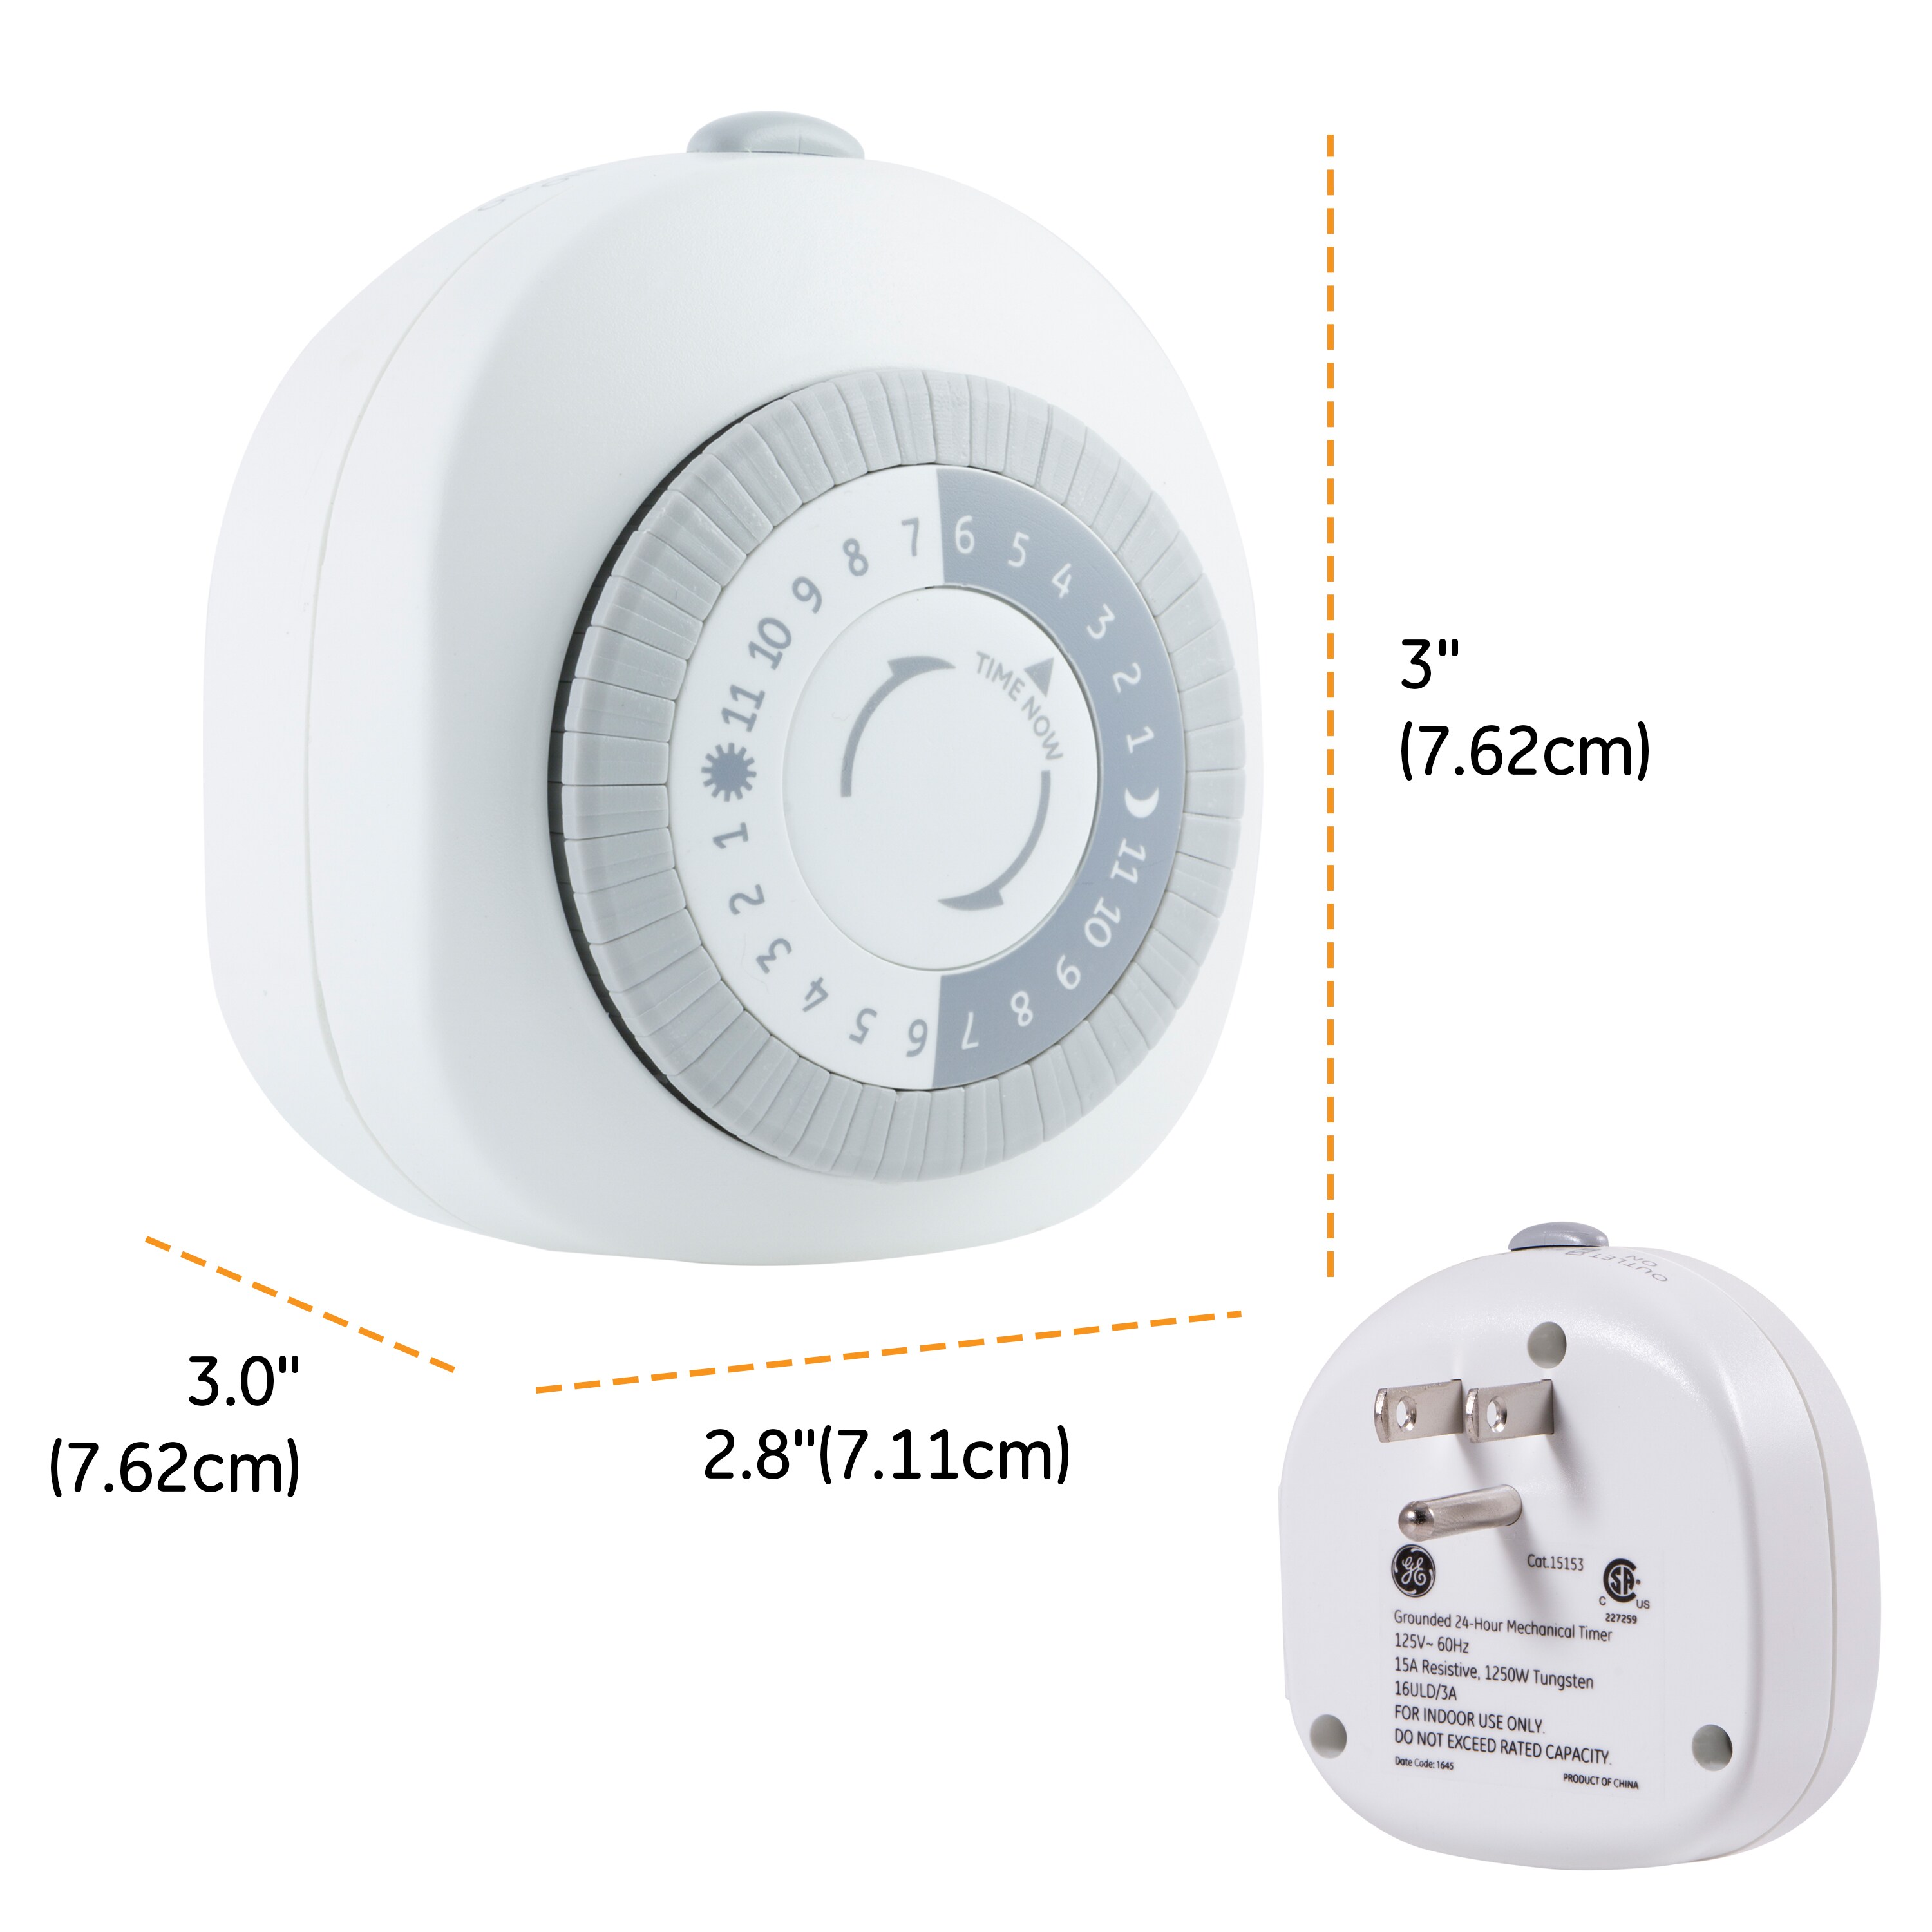 Outlet Timer: Silence EMFs Instantly & Automatically